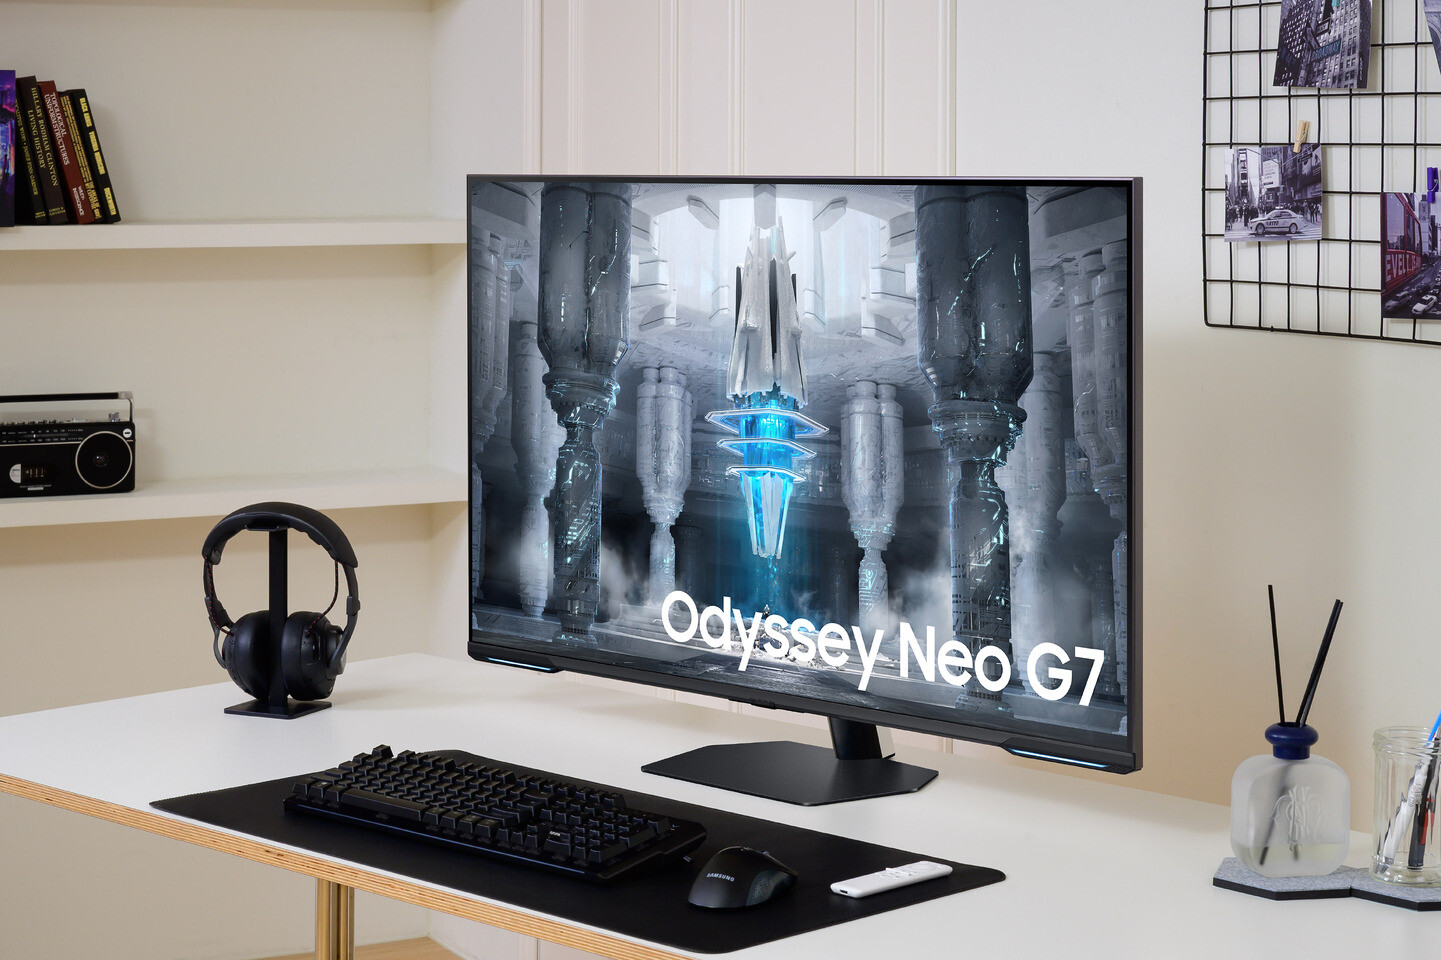 Meet the Odyssey Neo G7 43" — The First MiniLED Flat Gaming Monitor